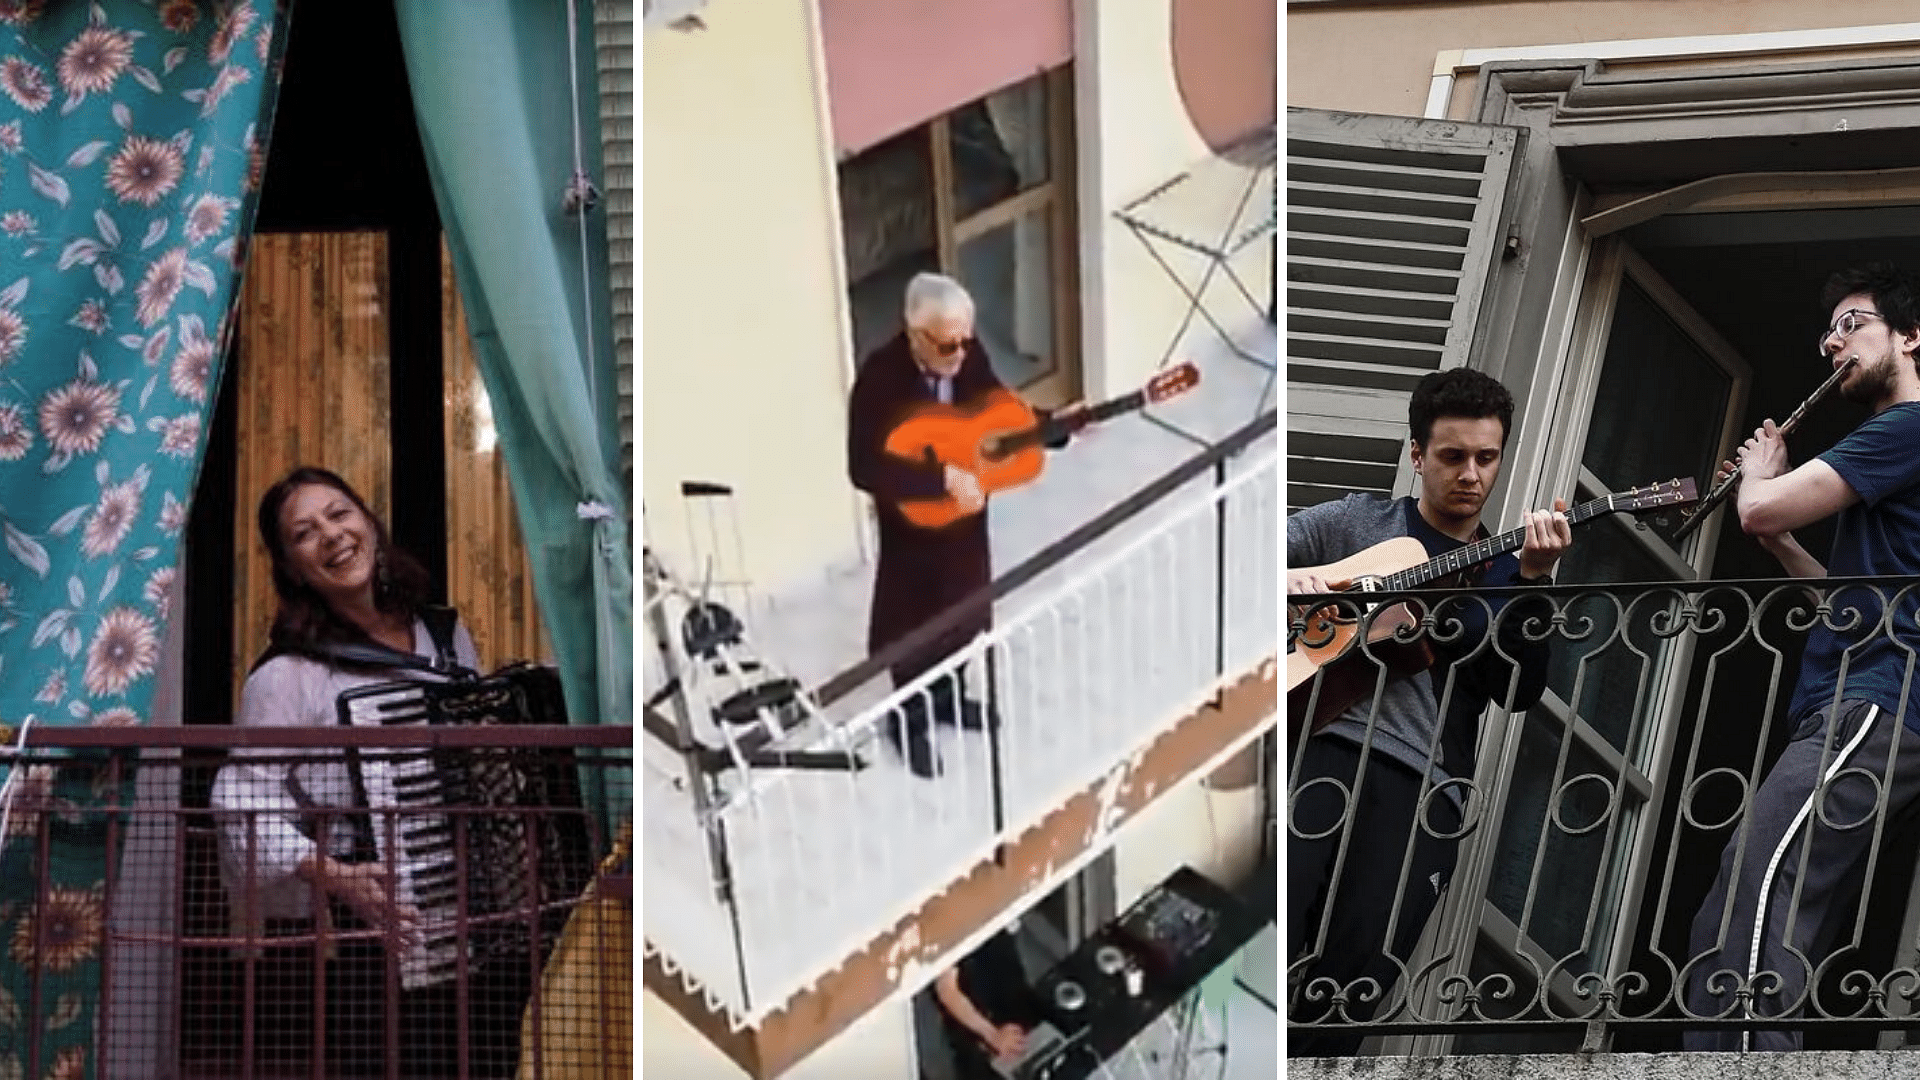 From balcony-jamming to fitness routines, Italians are getting creative.